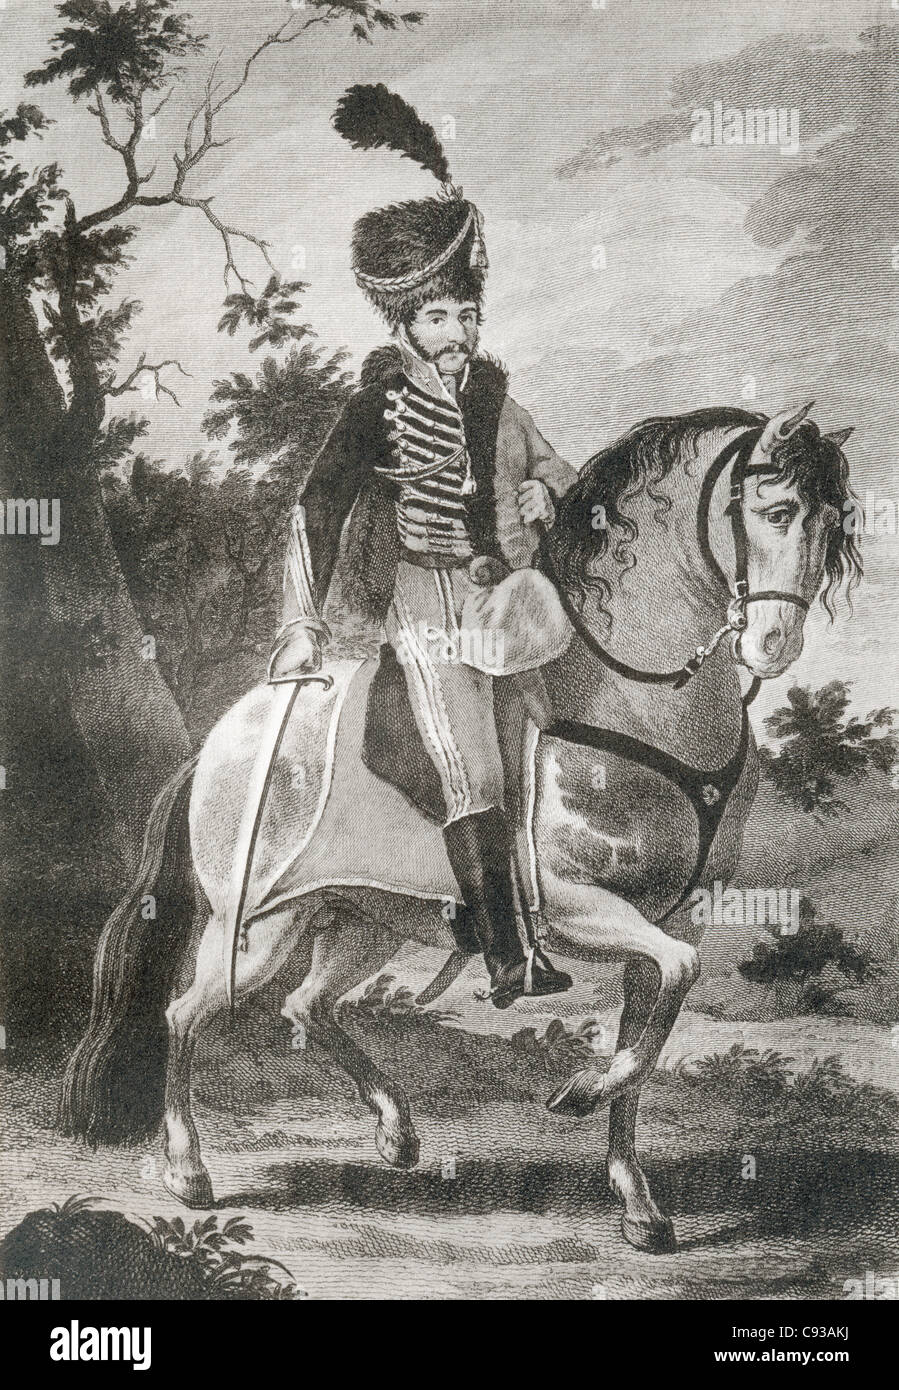 Juan Palarea y Blanes, aka el Médico, 1780 - 1842. Spanish soldier and guerrilla leader during the Spanish War of Independence. Stock Photo